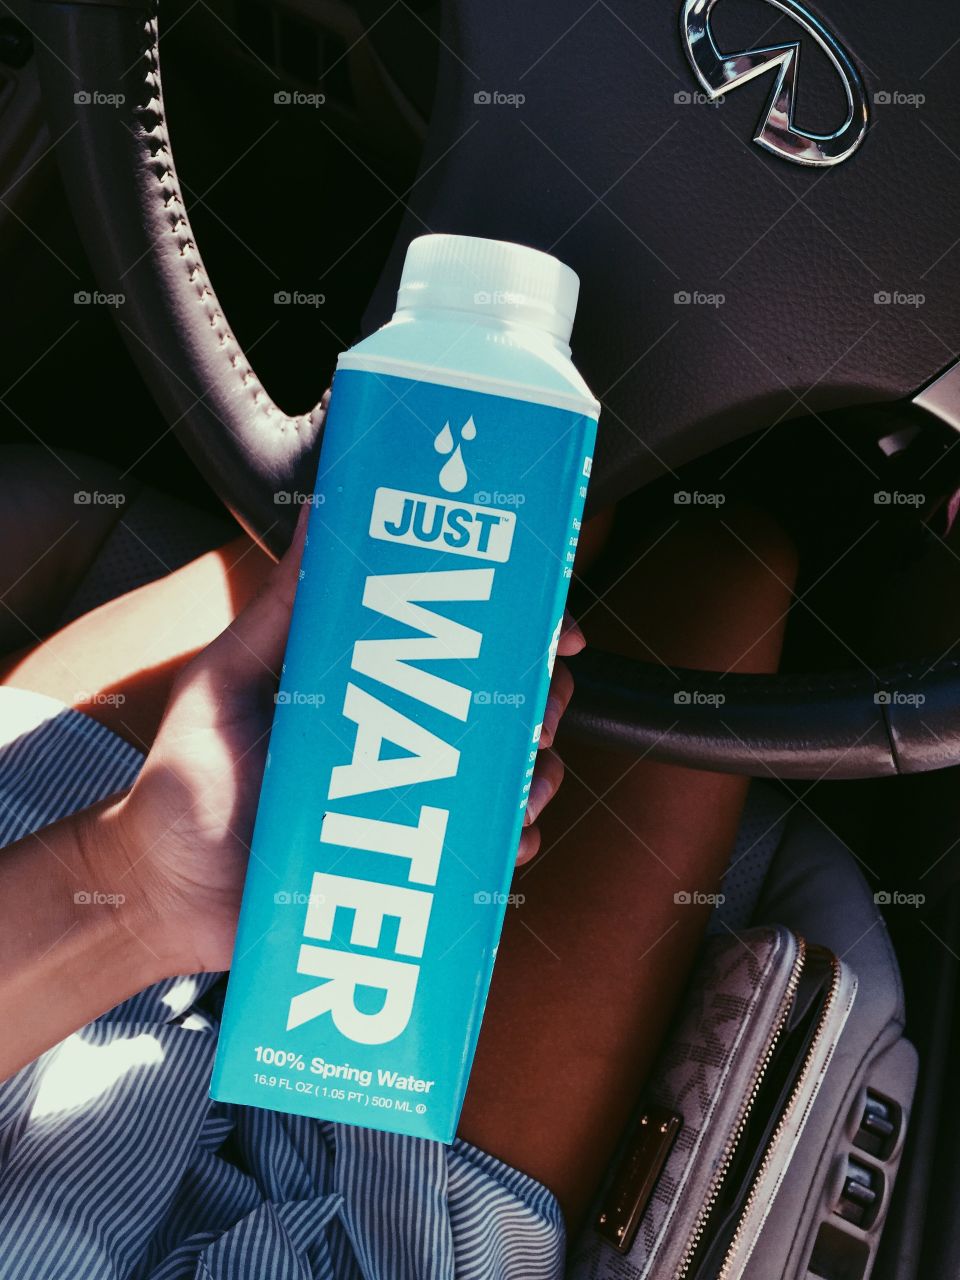 Boxed water is the best water !